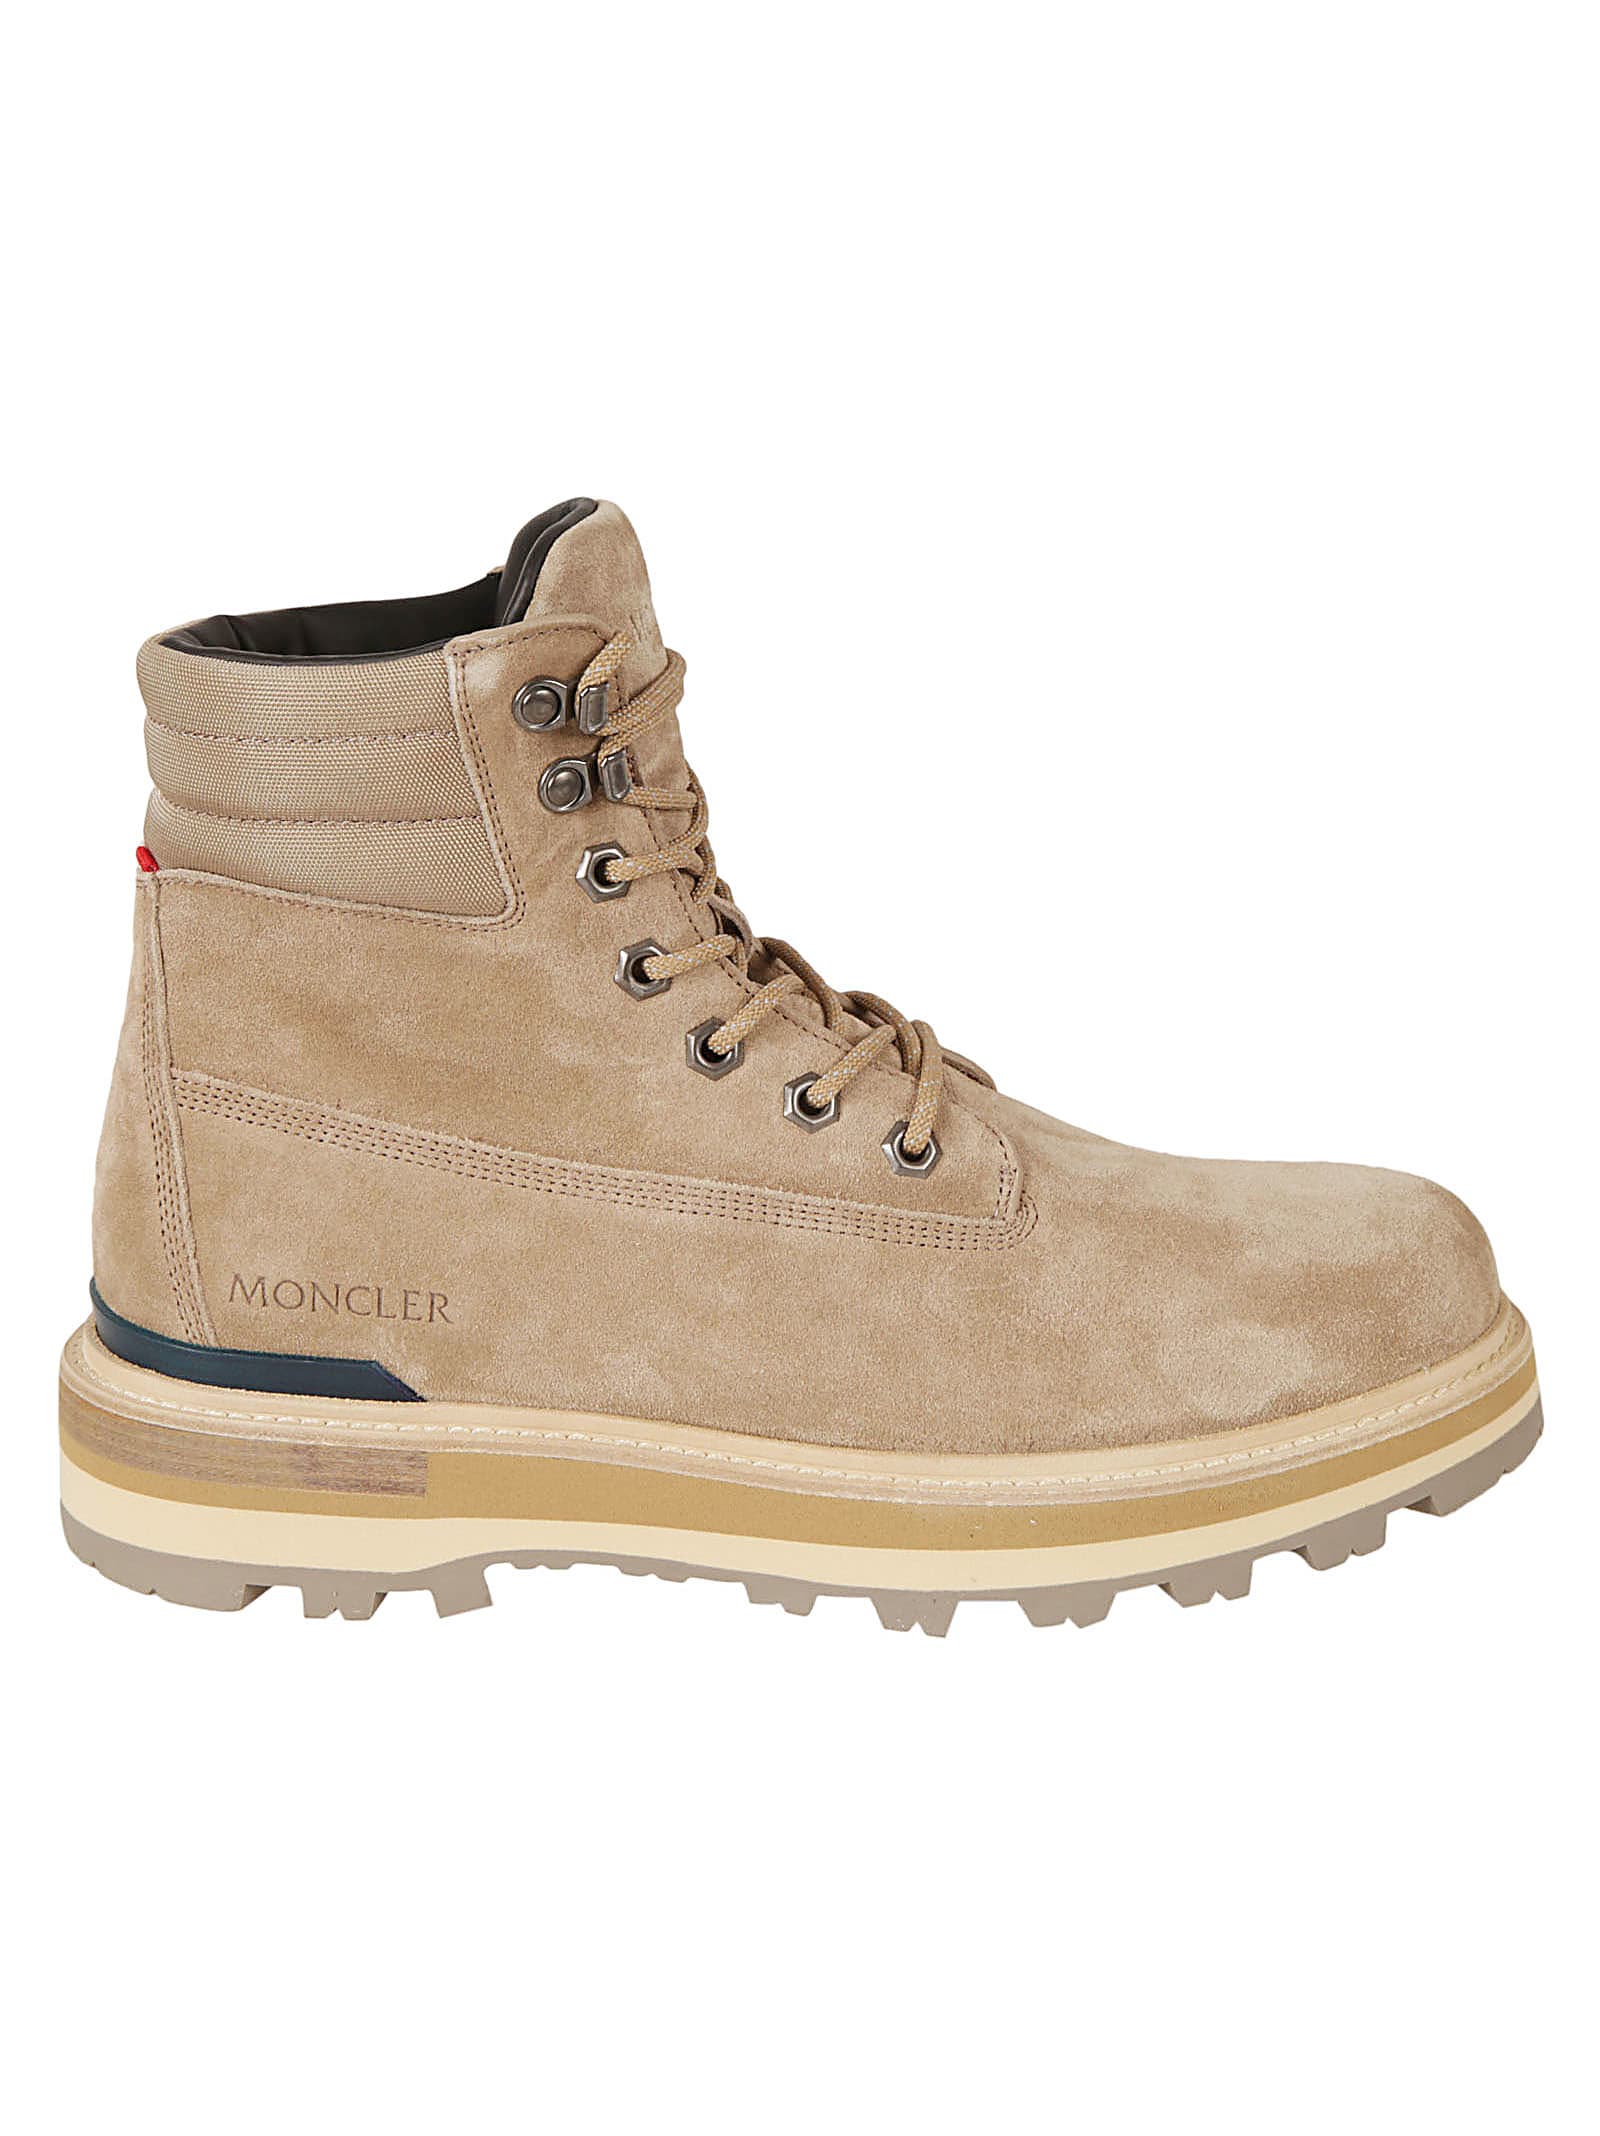 Moncler Peka Hiking Boots In Medium Beige